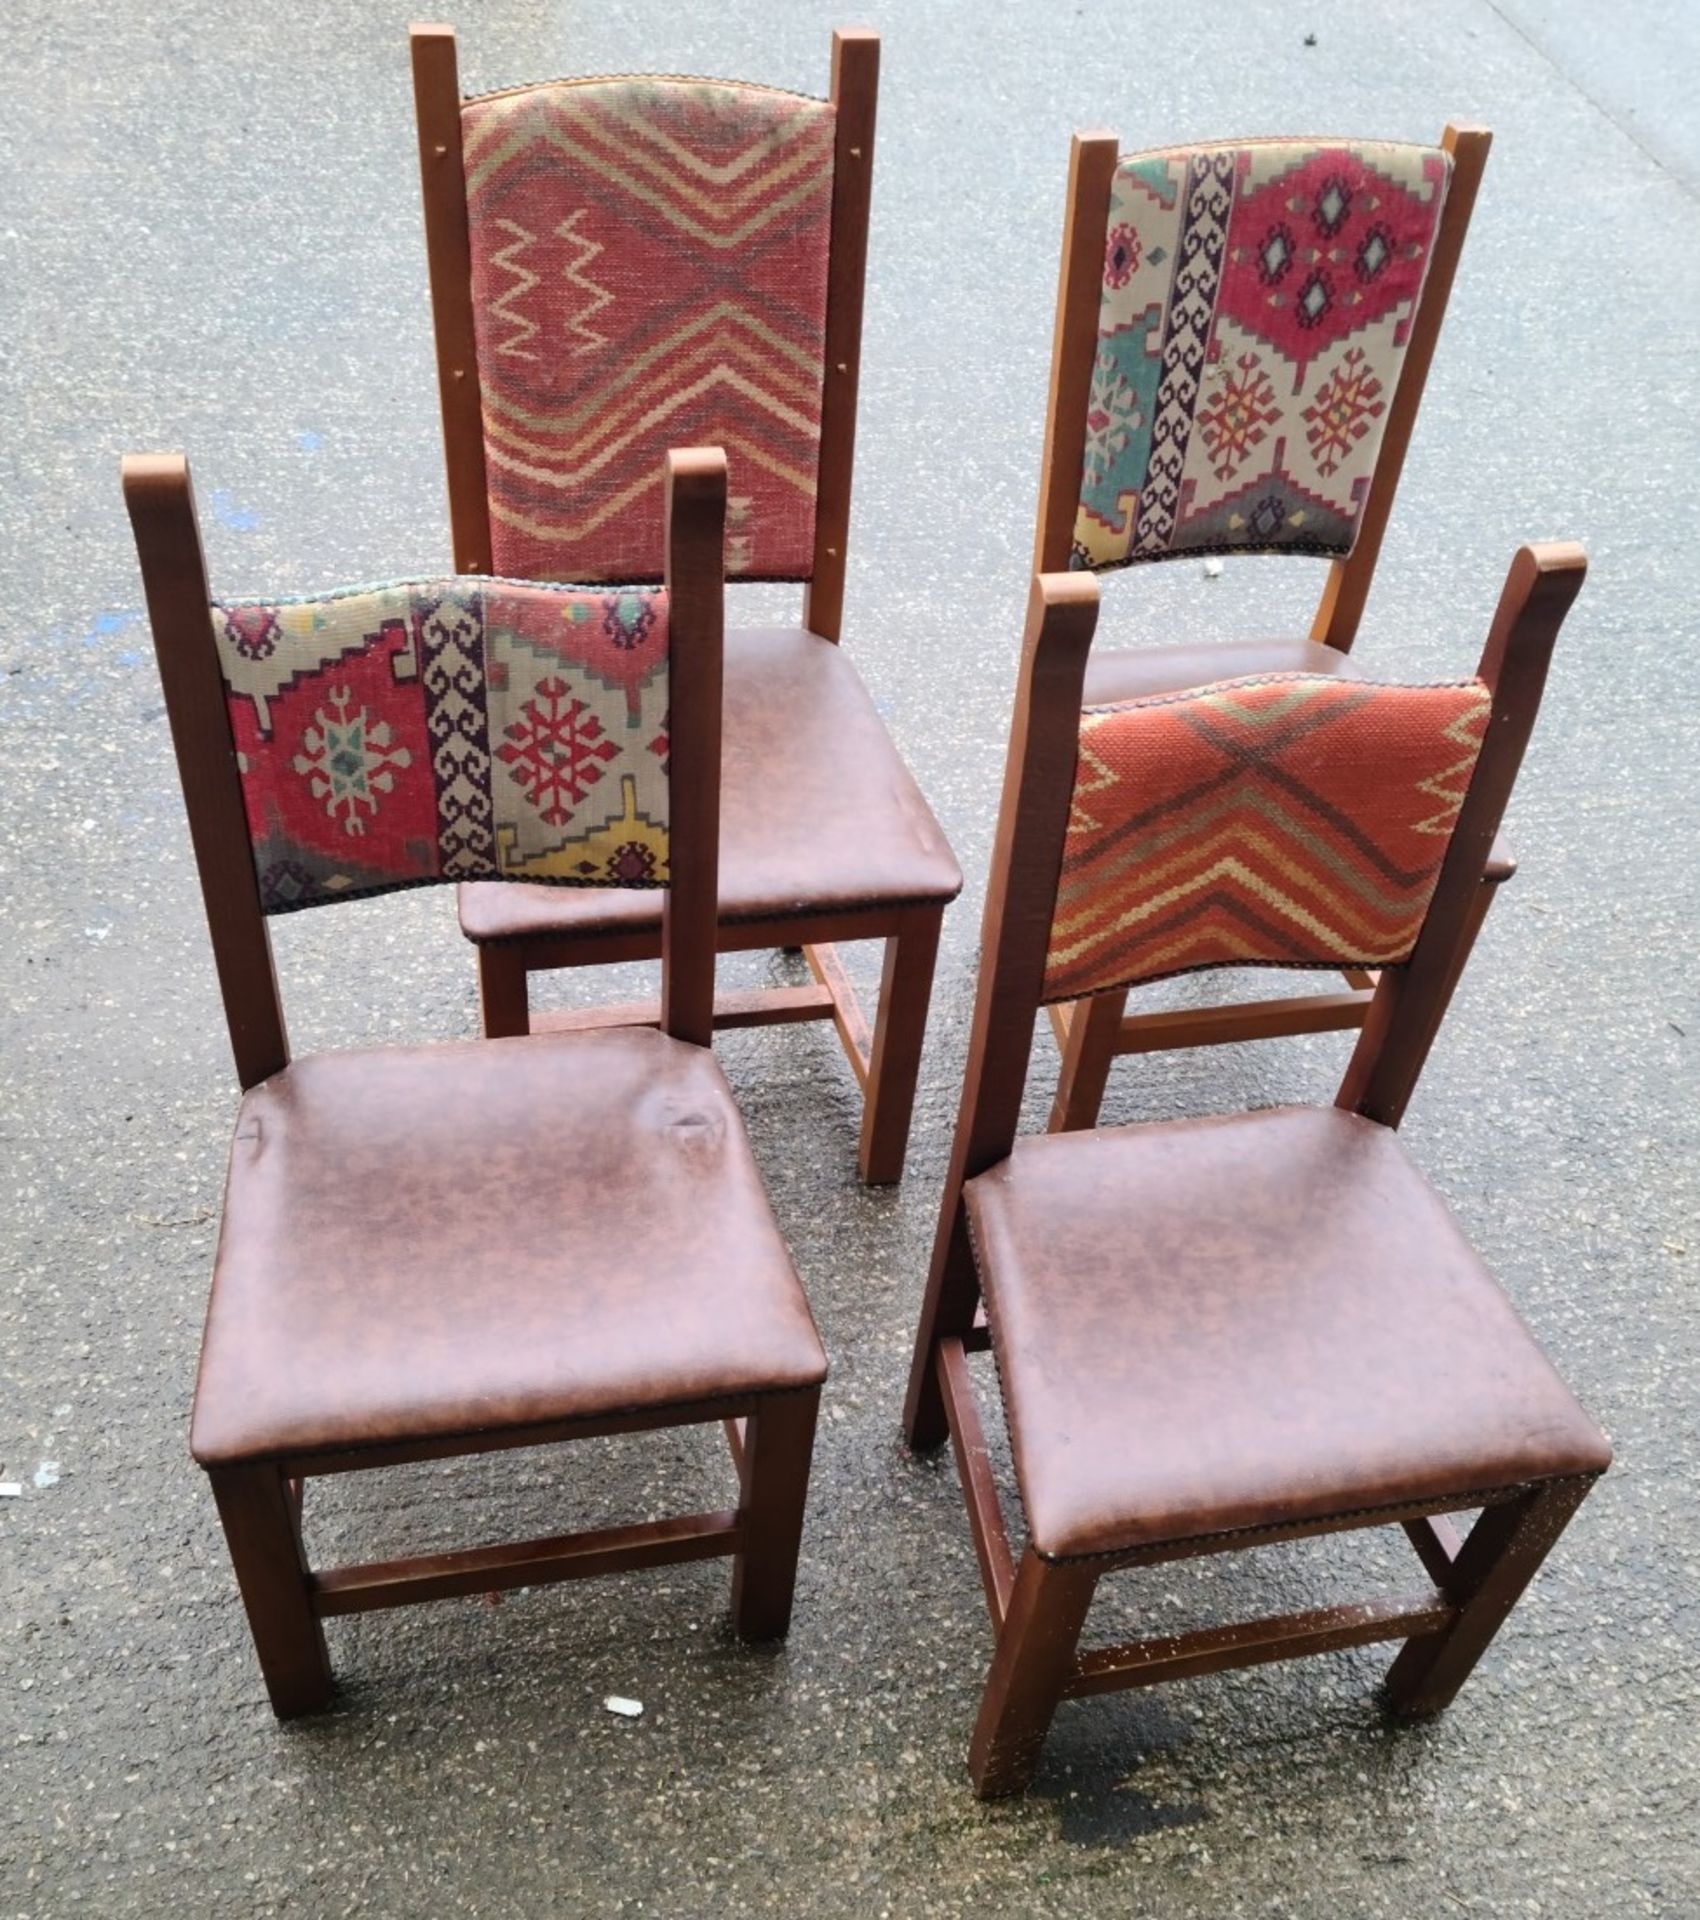 Set Of 4 x Aztec Print Dining Chairs With Faux Brown Leather Seating & Studded Seams - Image 3 of 6